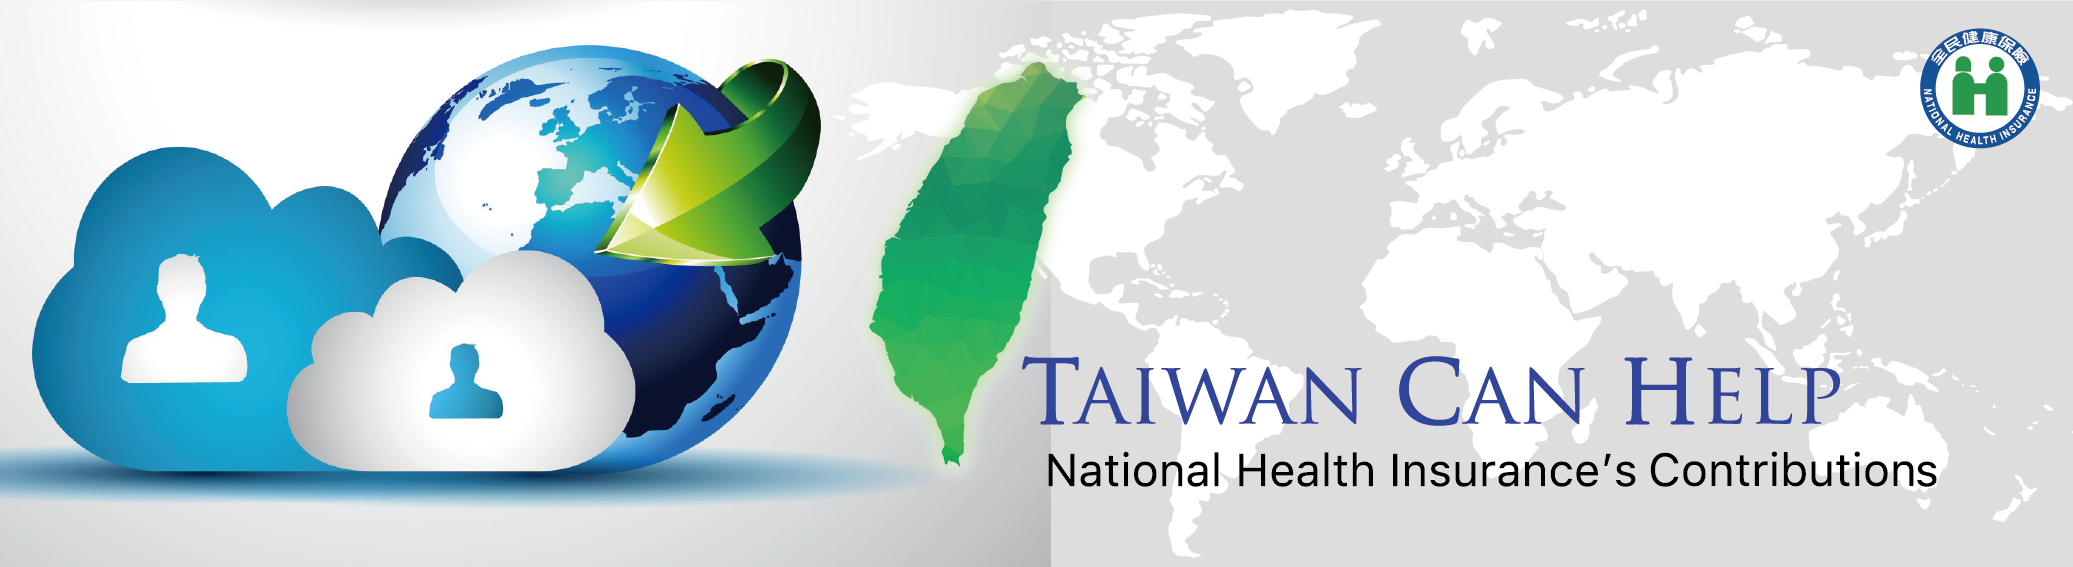 Taiwan Can Help - National Health Insurance’s Contribution in Combating COVID-19